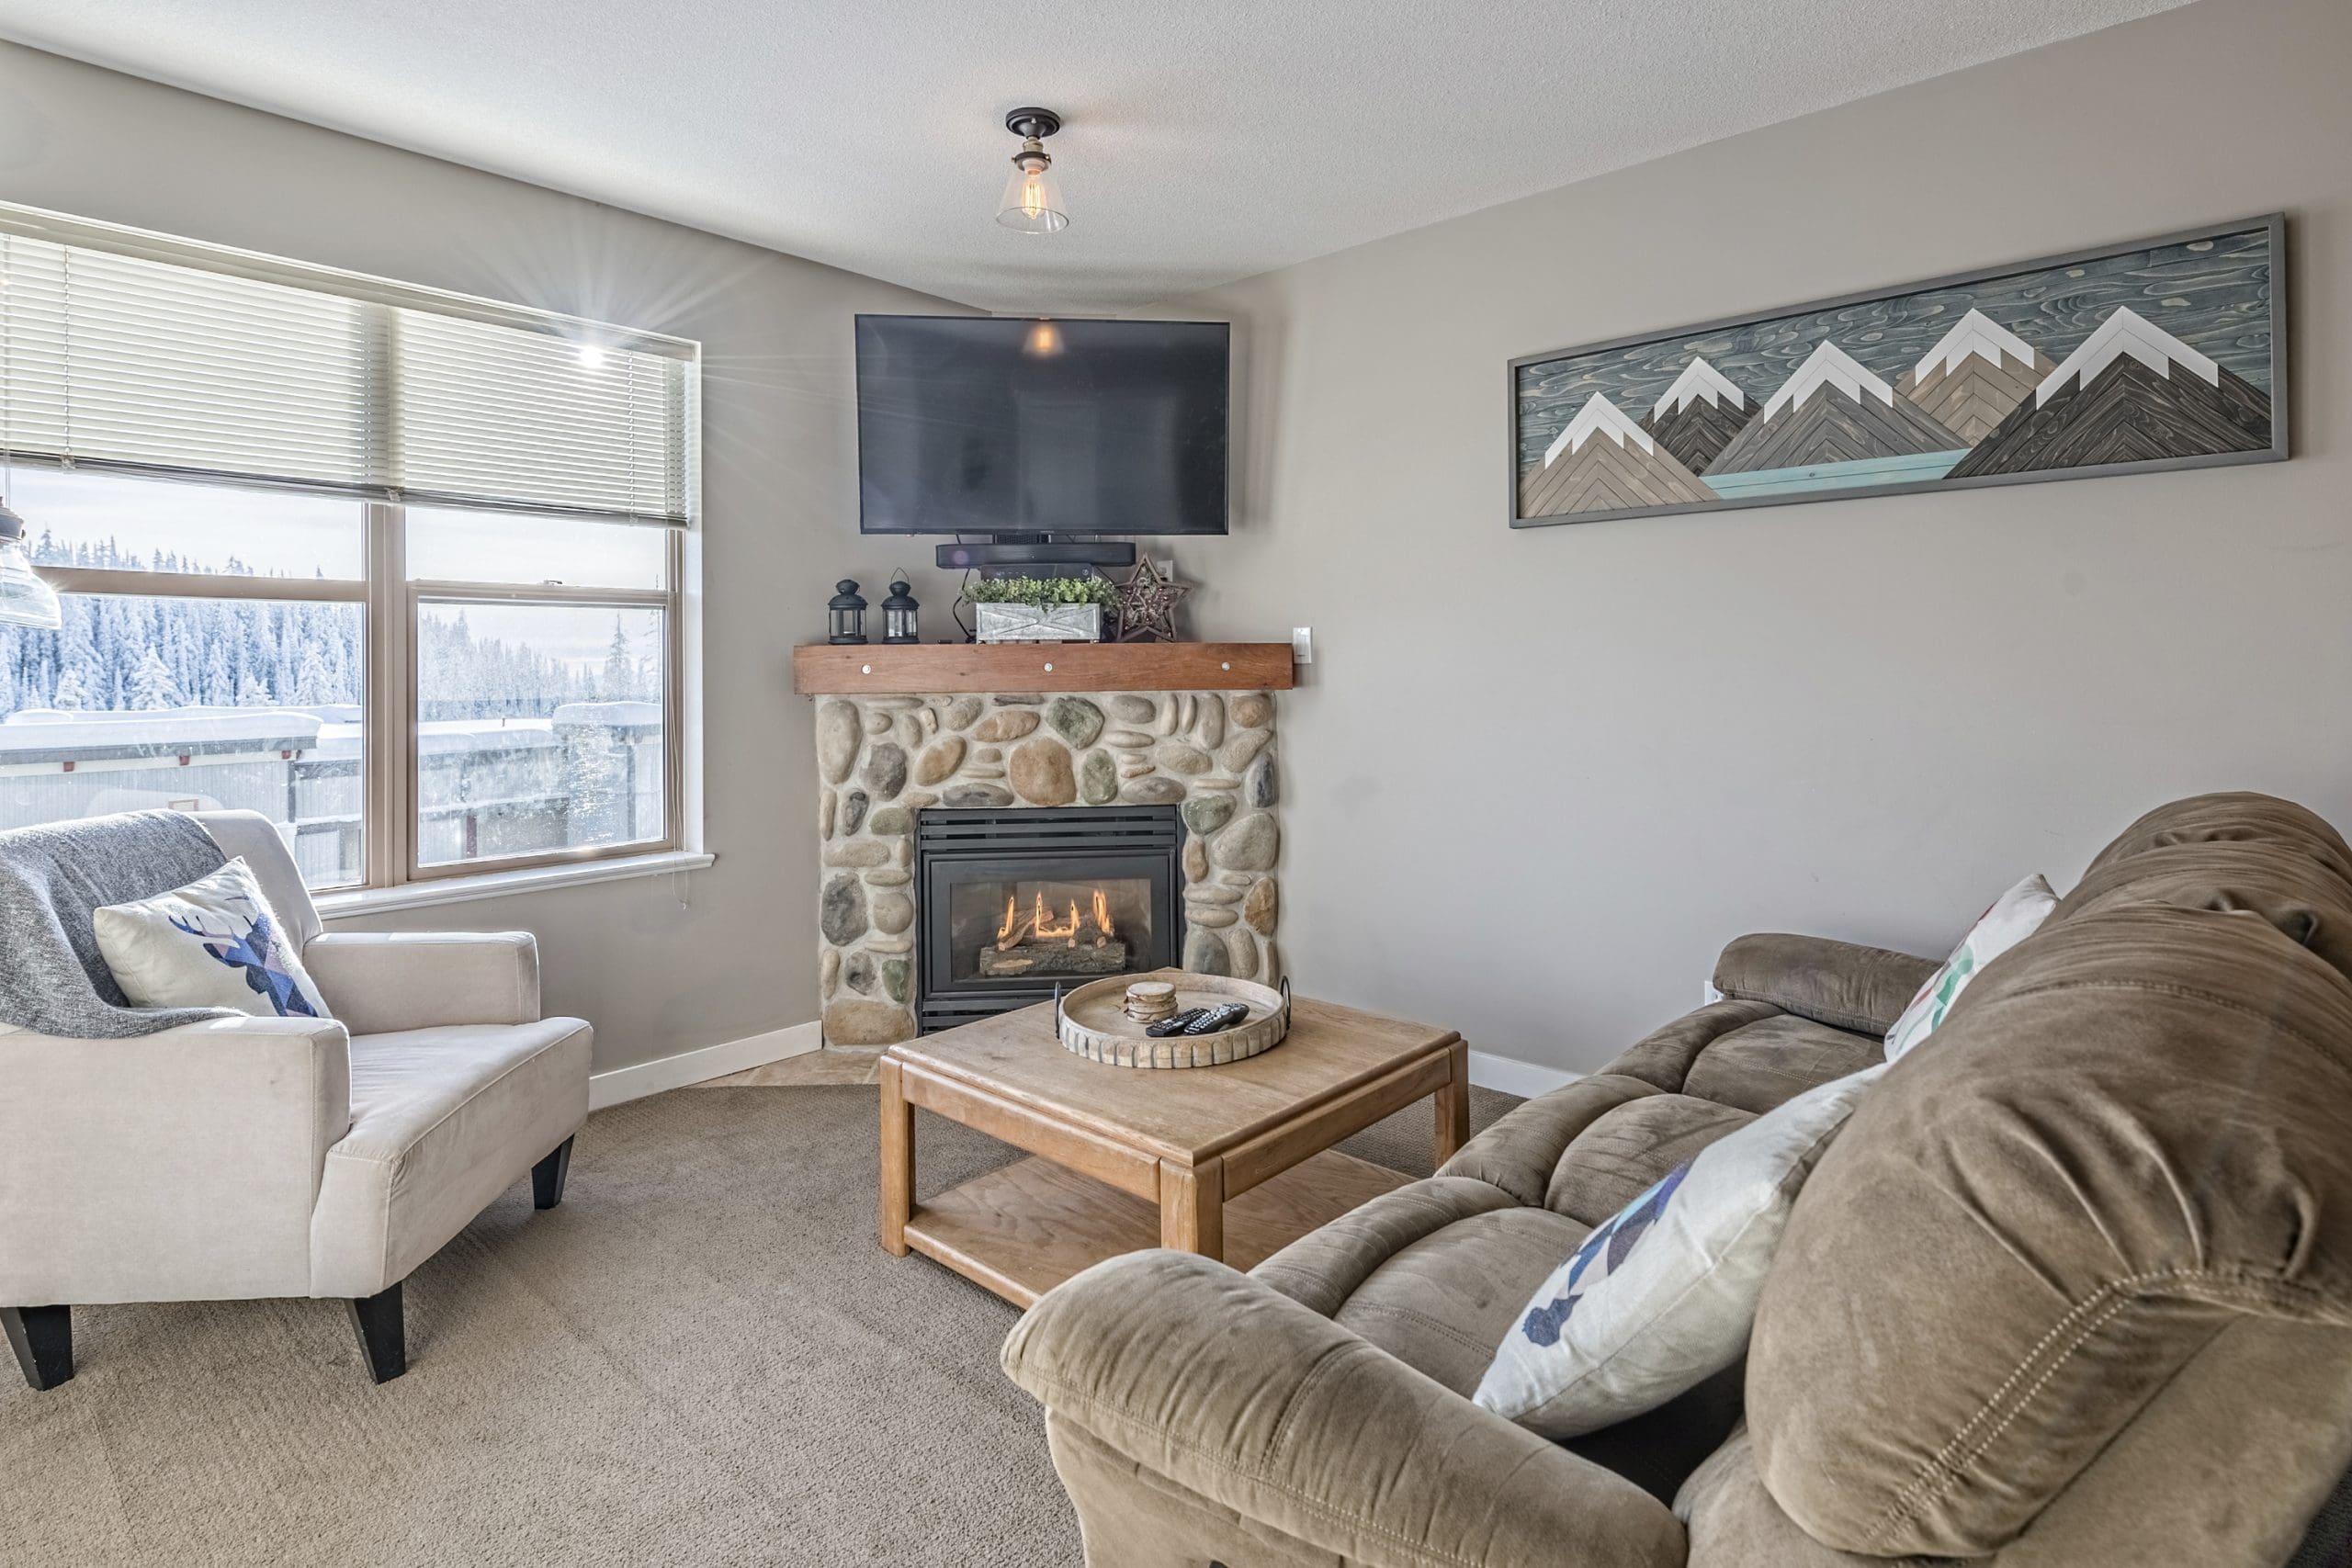 Cozy second floor condo with ground level access. Pet-friendly, bright windows with gas fireplace, TV, BBQ on patio, and air conditioning in unit. It's pet-friendly too!